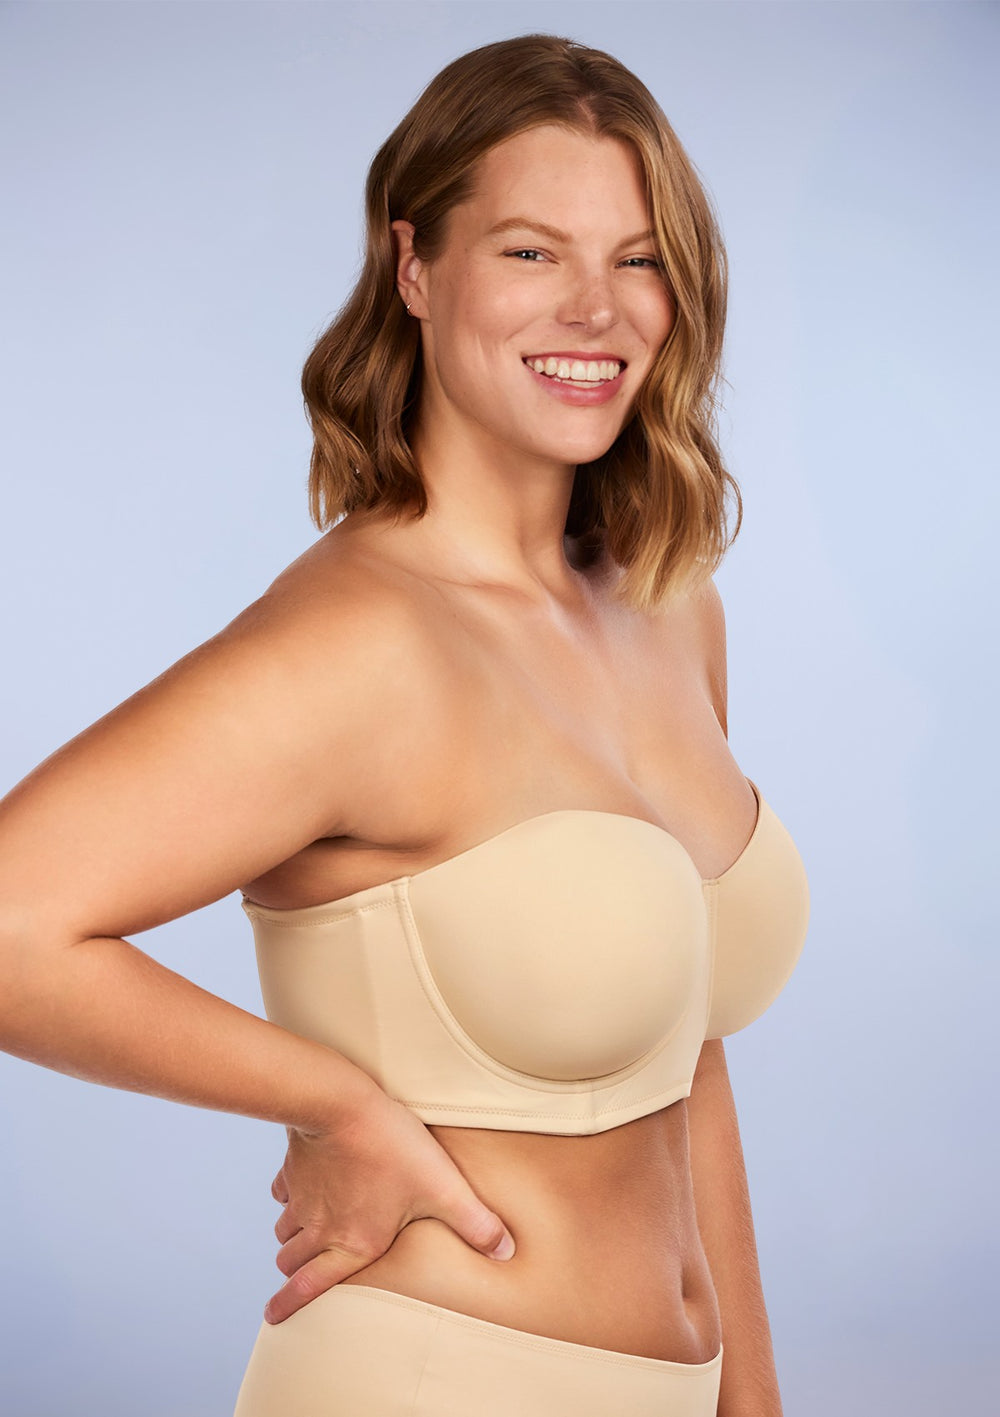 The 7 Best Strapless Bras for DD Cups  Best strapless bra, Strapless bra  hacks, Strapless bra for dd